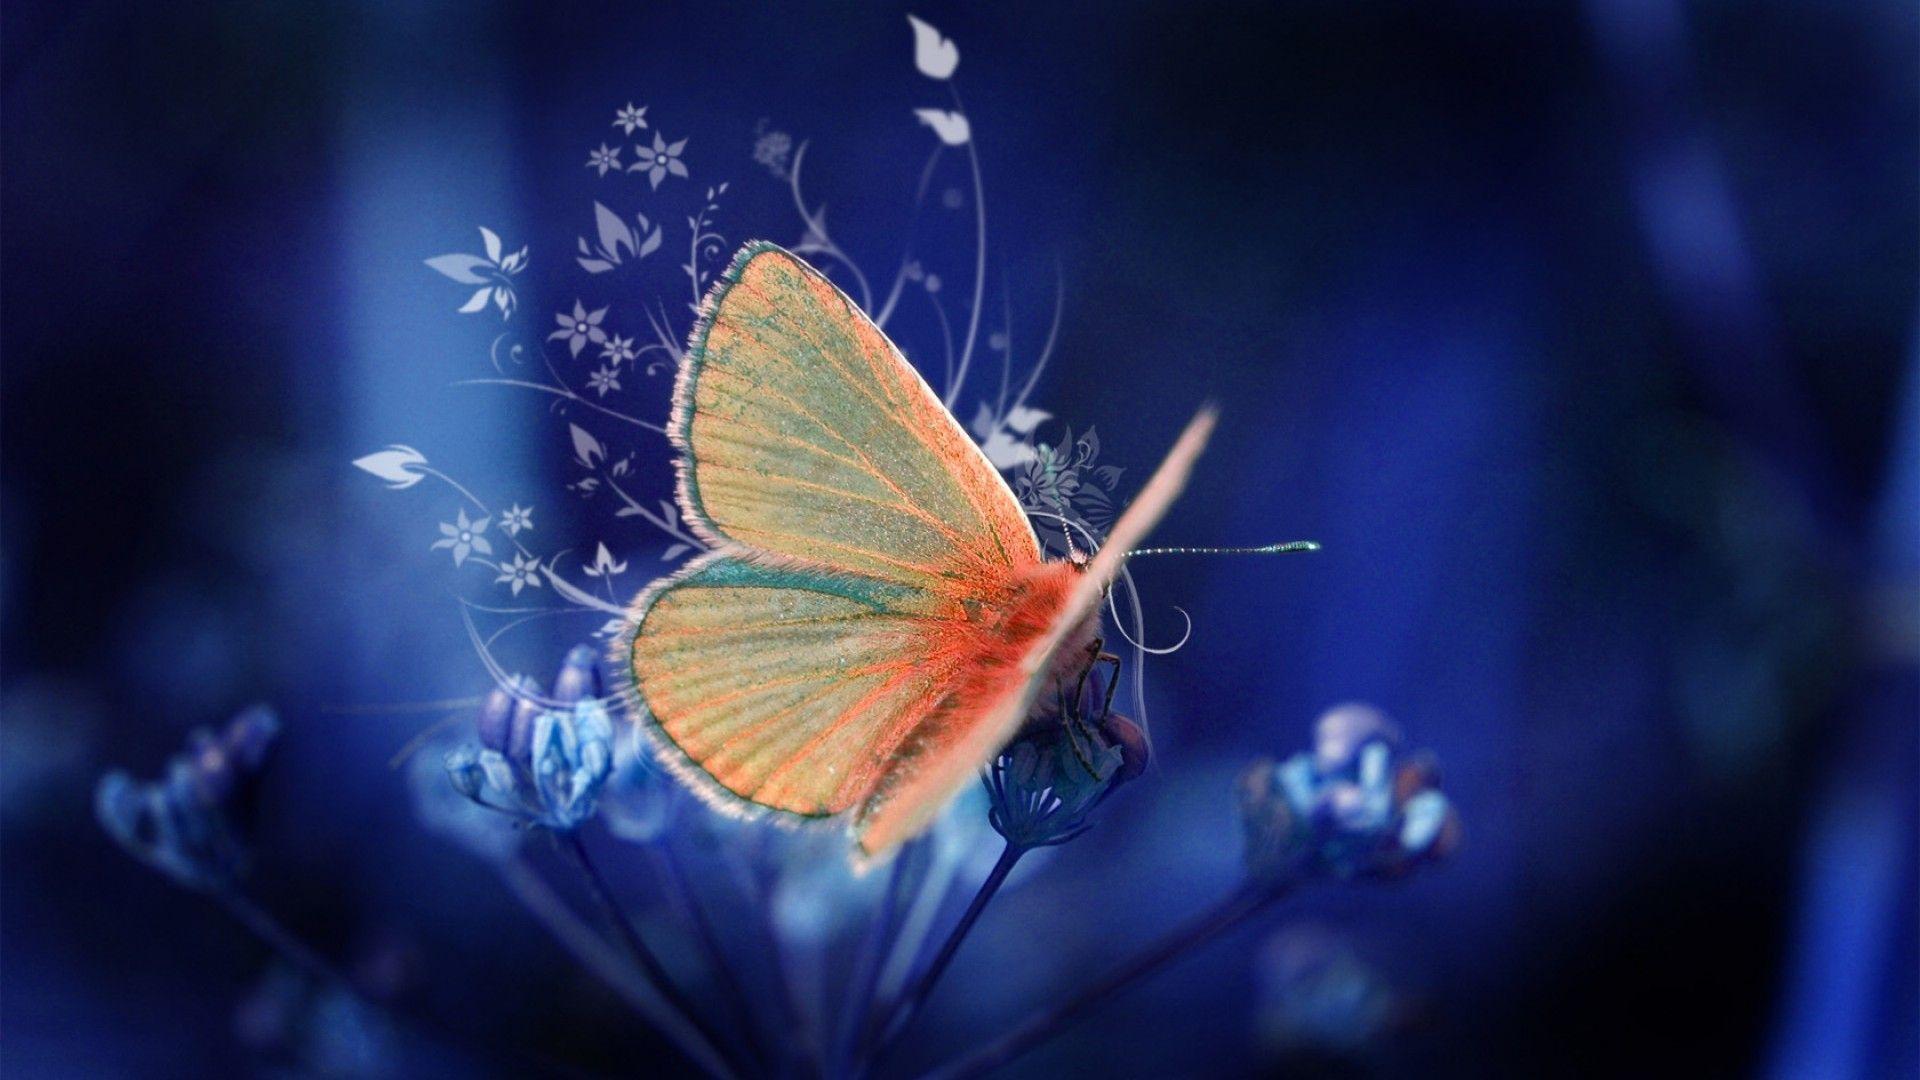 Butterfly wallpaper image with good attraction